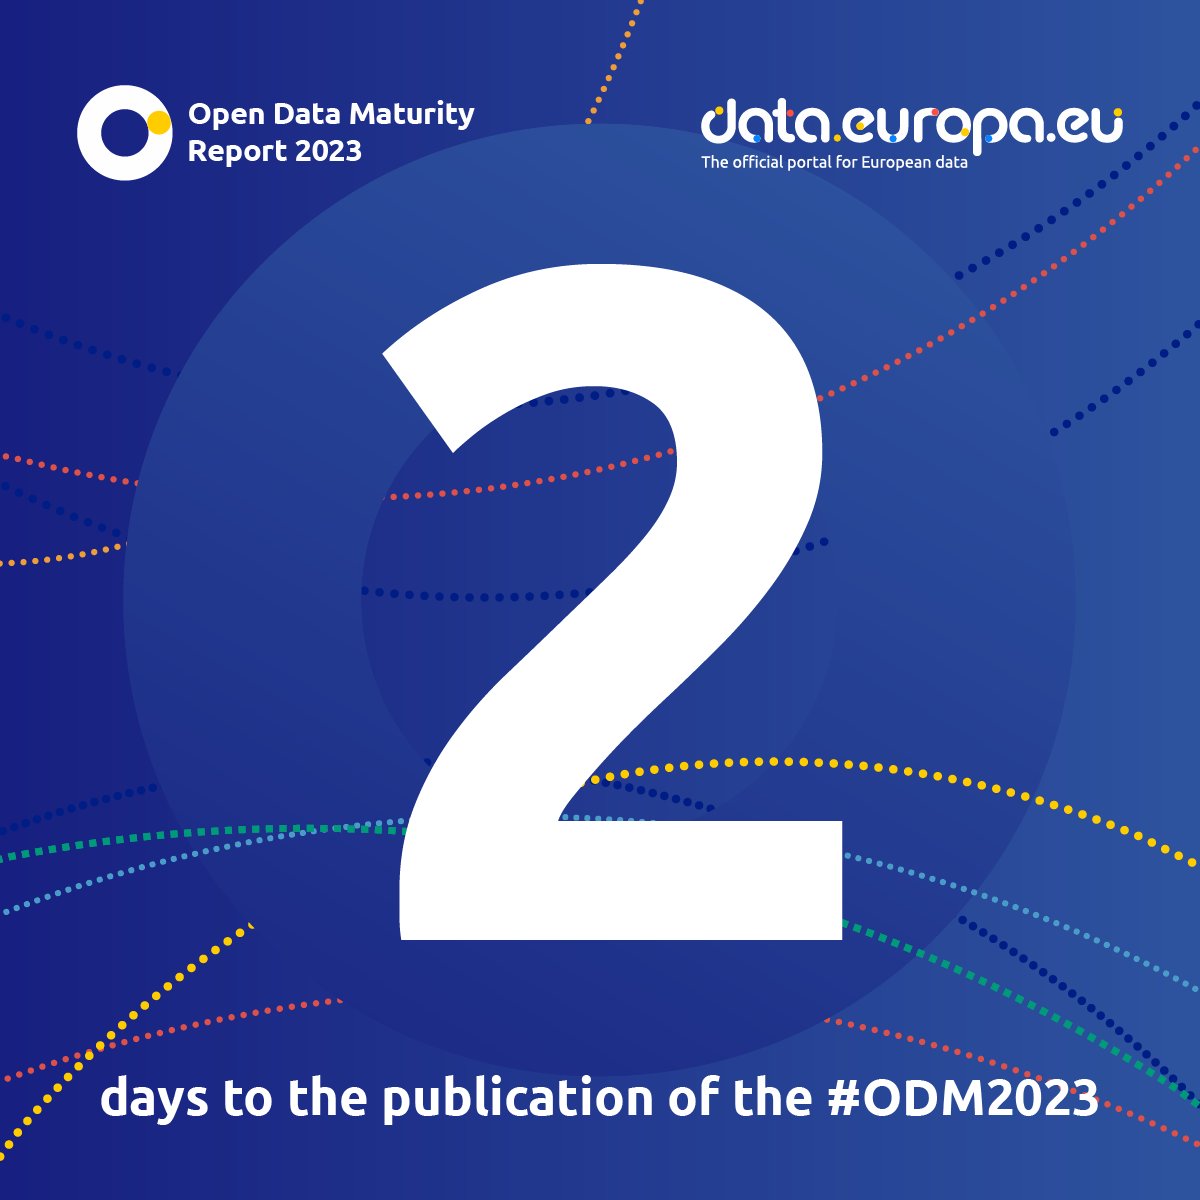 In 2022 all EU countries were preparing their #statistics data for the regulation on #highvalue datasets. Curious to know the progress? Just 2 more days until the 2023 Open Data Maturity assessment is released!  

#EUOpenData #OpenDataMaturity #ODM2023